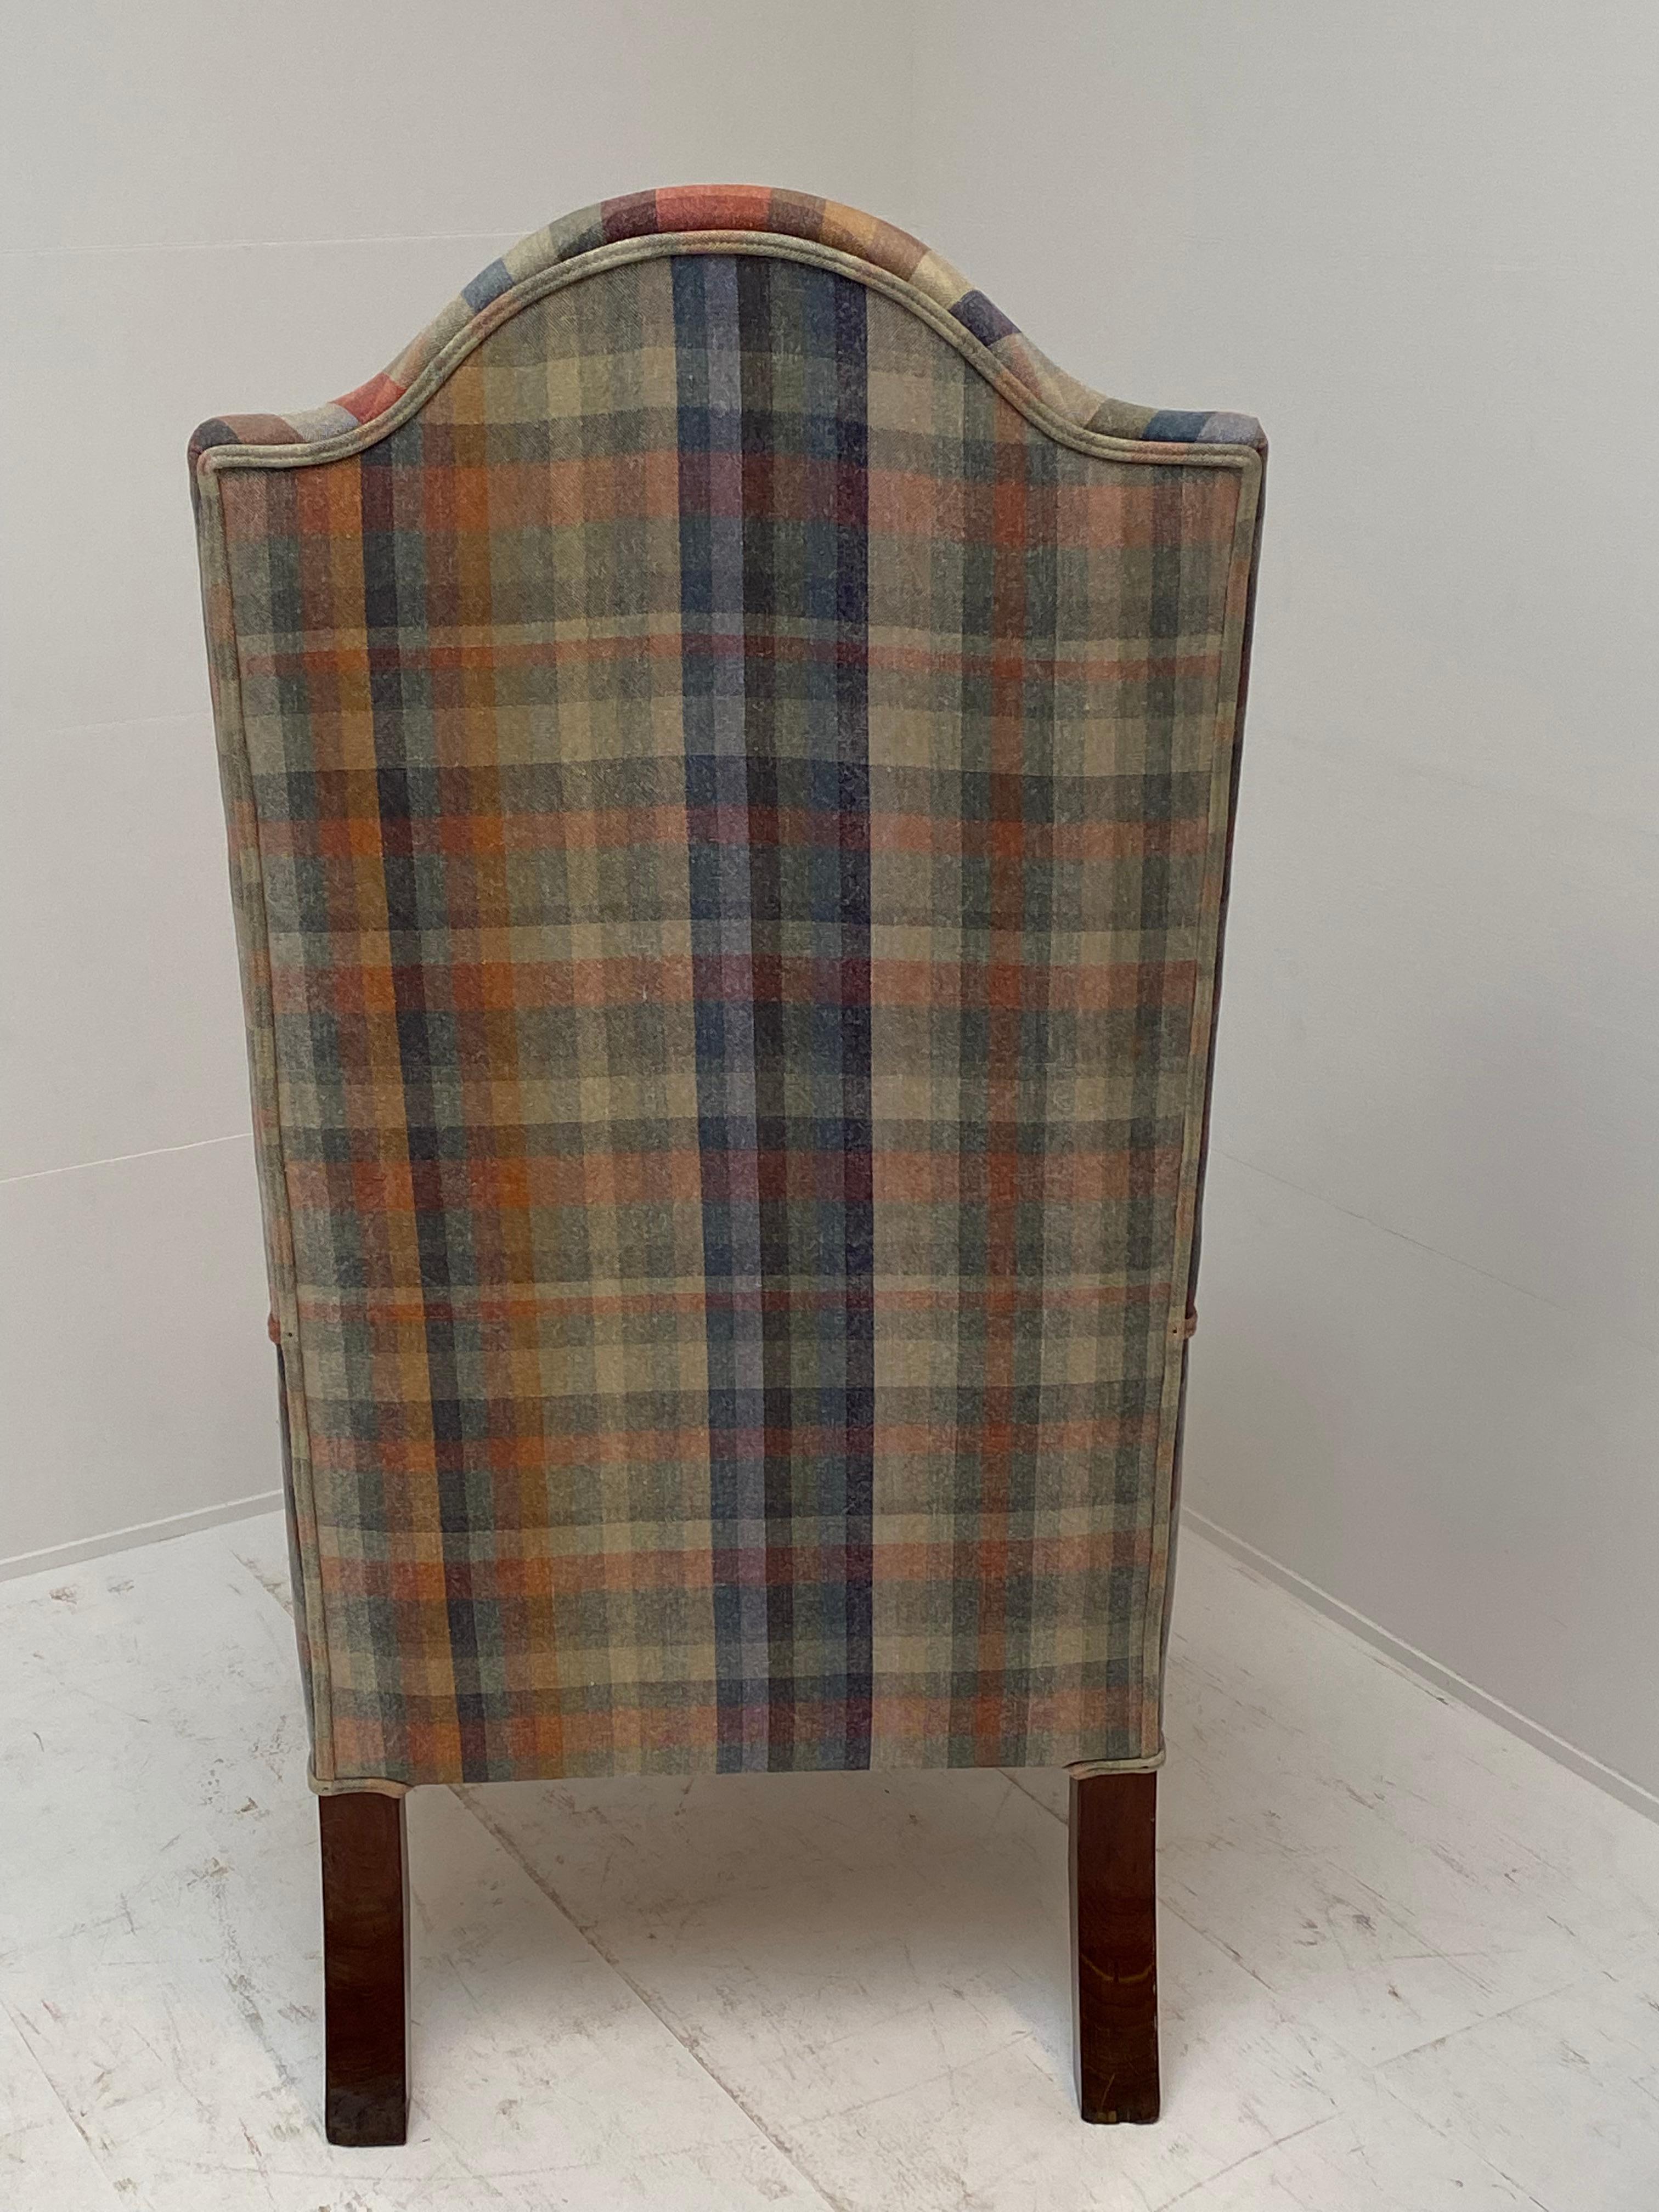 Polished  Antique Scottish Wing Chair with Claw-Feet and Tartan Fabric